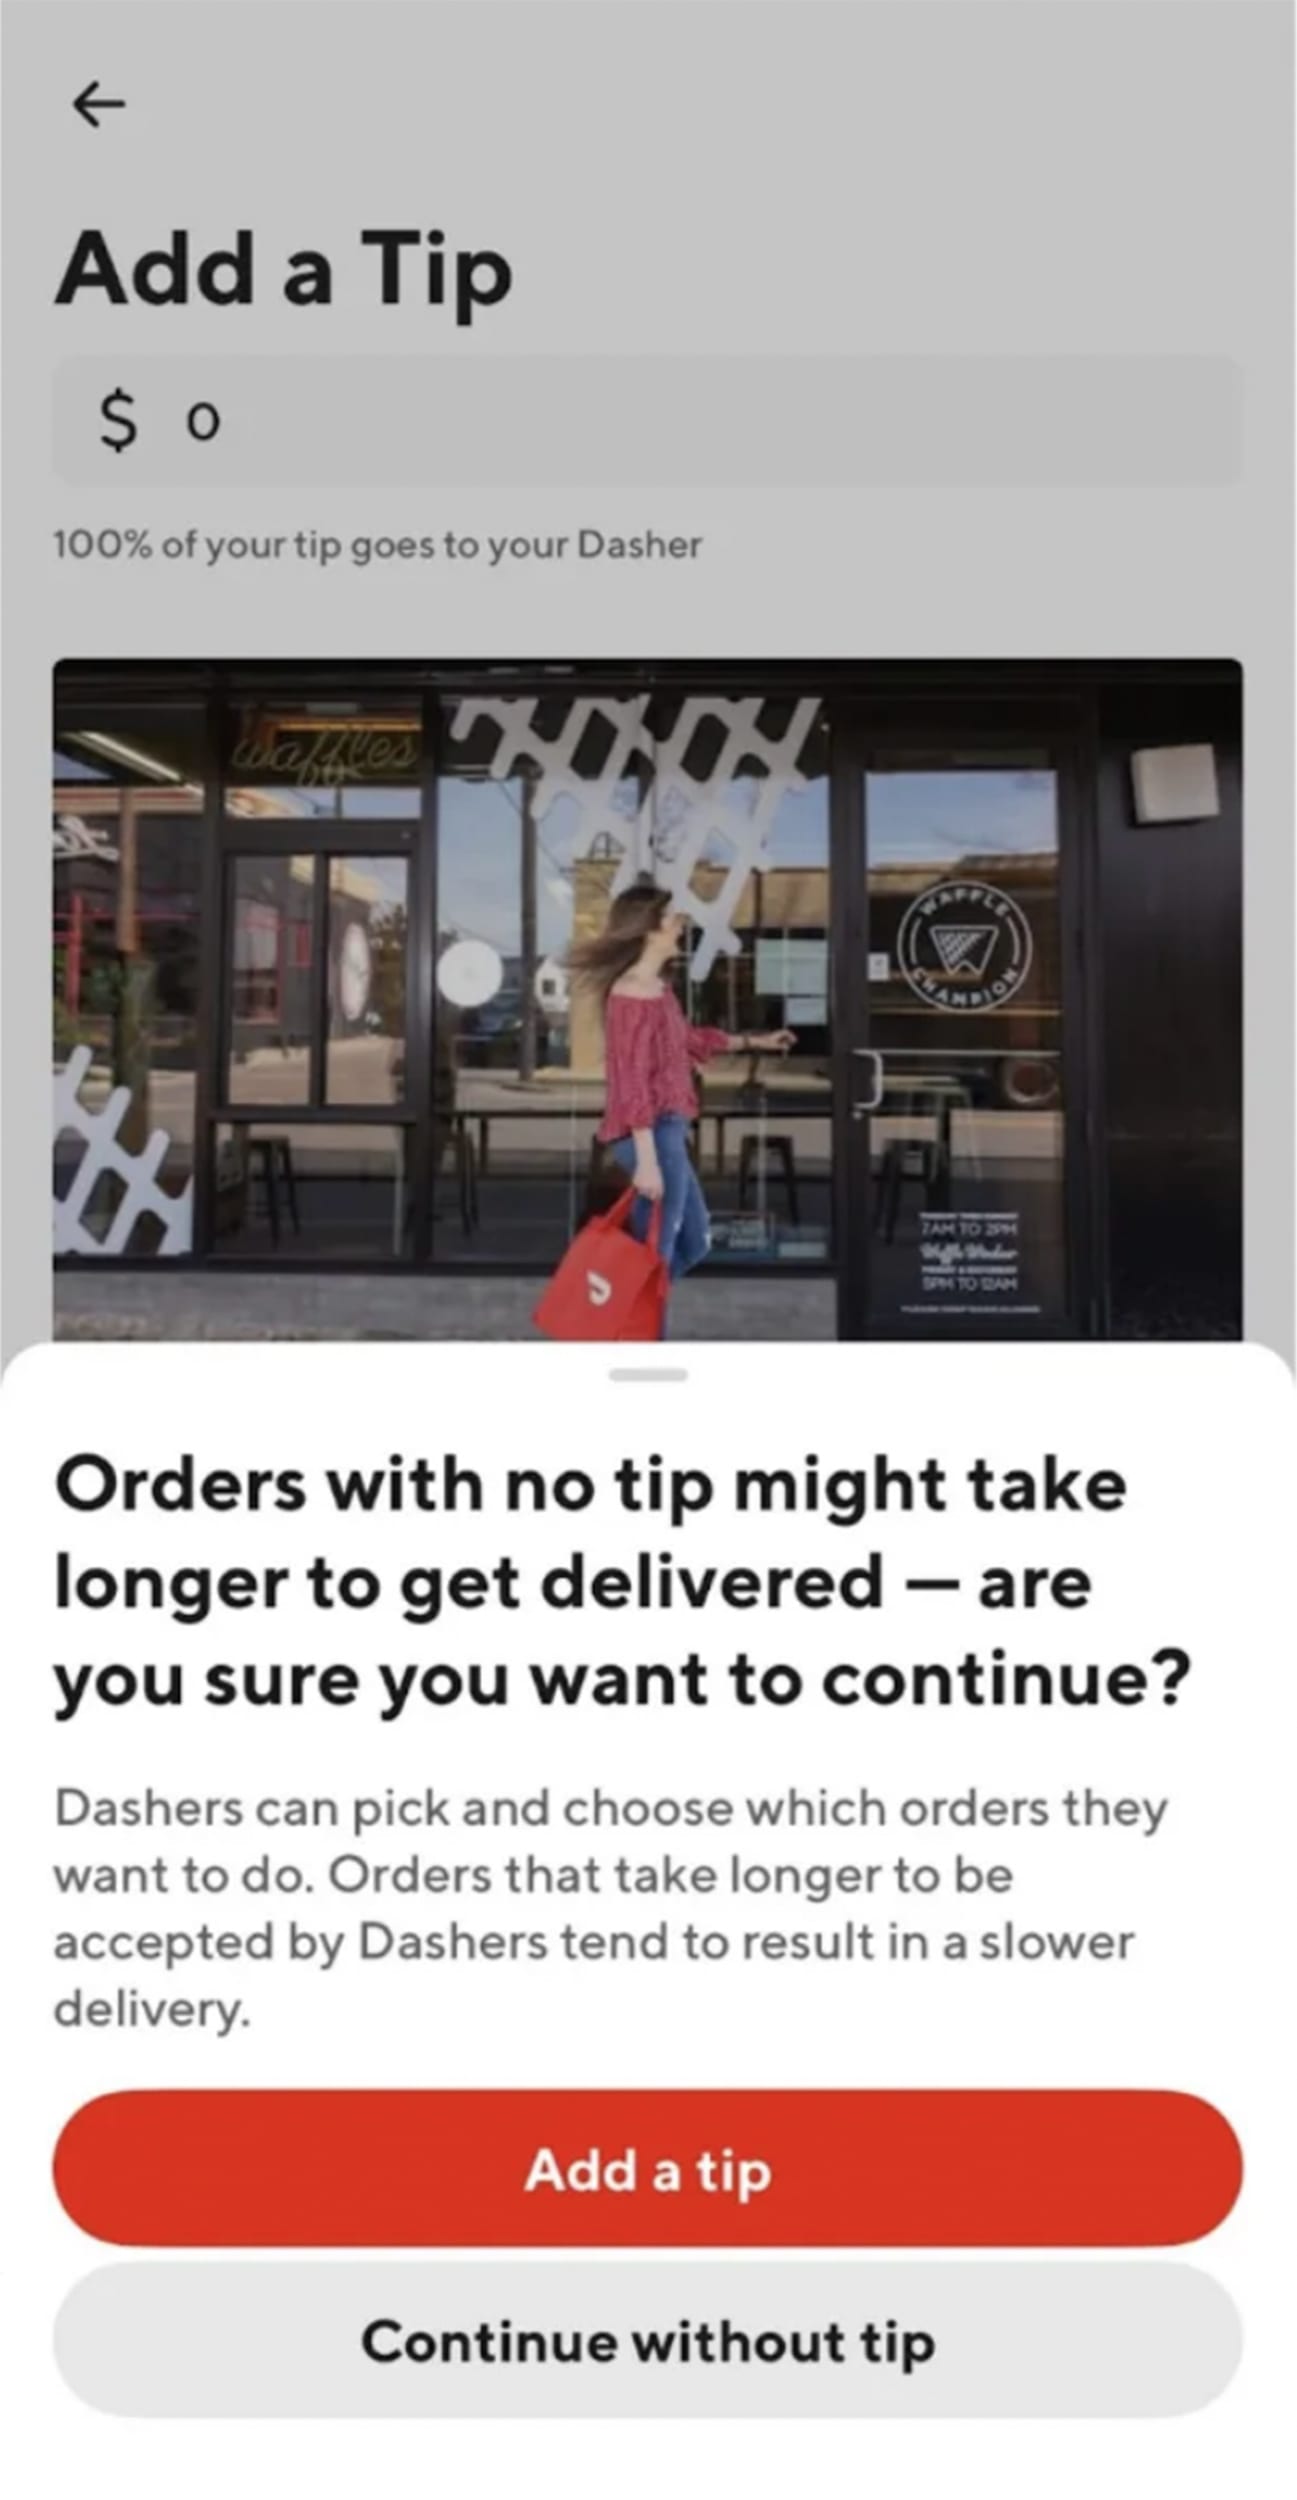 DoorDash warning customers their orders could be delayed if they don't tip  - ABC News